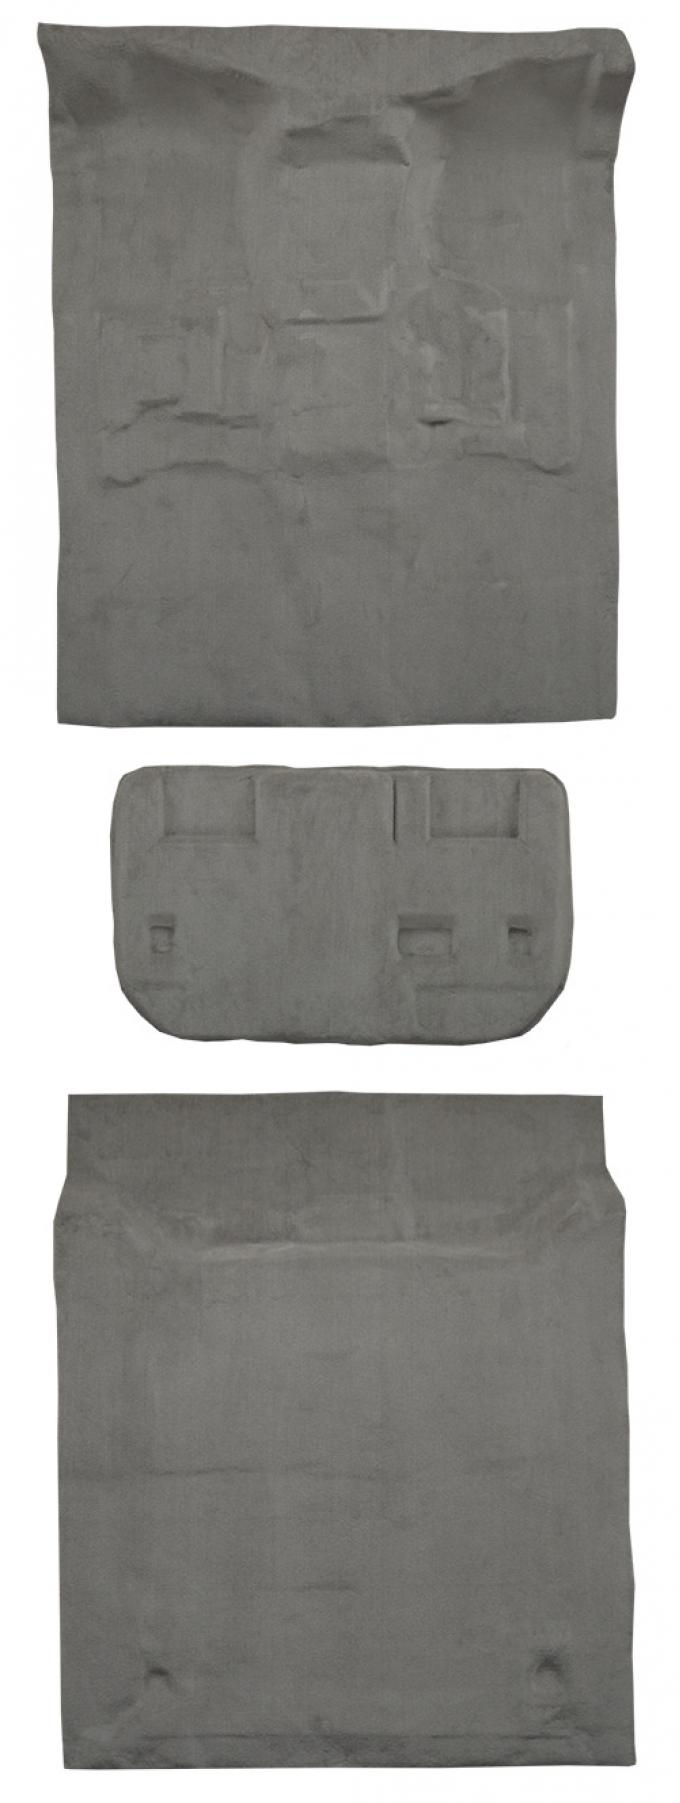 ACC 2007-2009 Chevrolet Suburban 2500 4DR w/2nd Row 60-40 Seat Mount Cover w/o Heel Pad Complete Cutpile Carpet